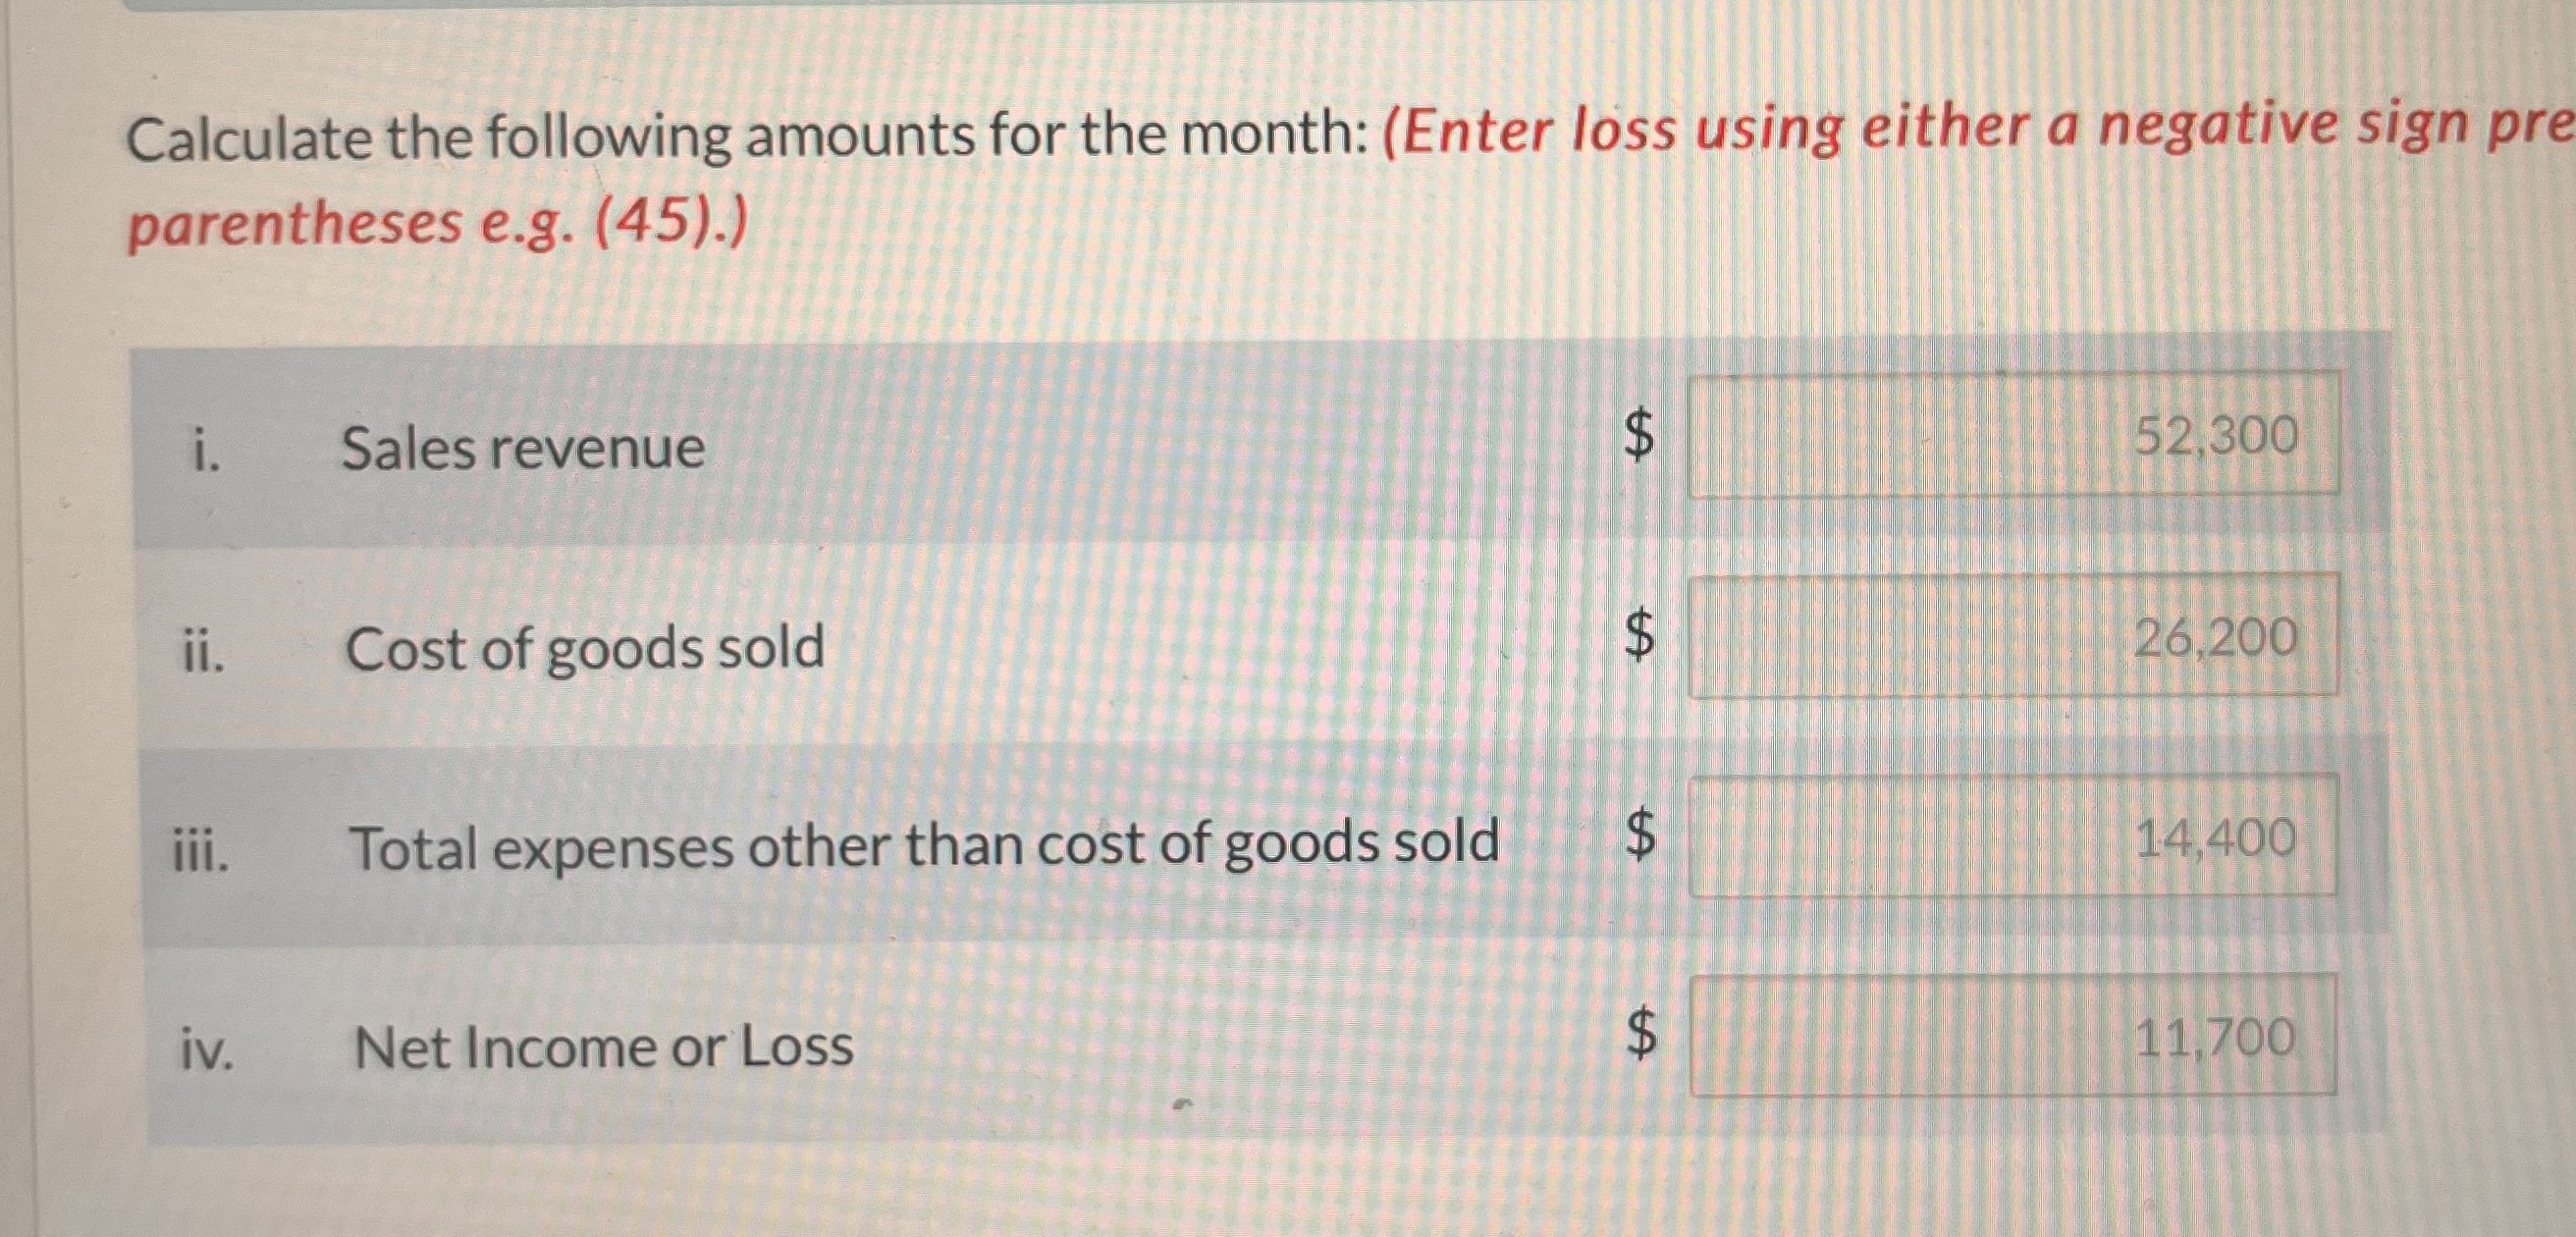 Calculate the following amounts for the month: (Enter loss using either a negative sign pre parentheses e.g.